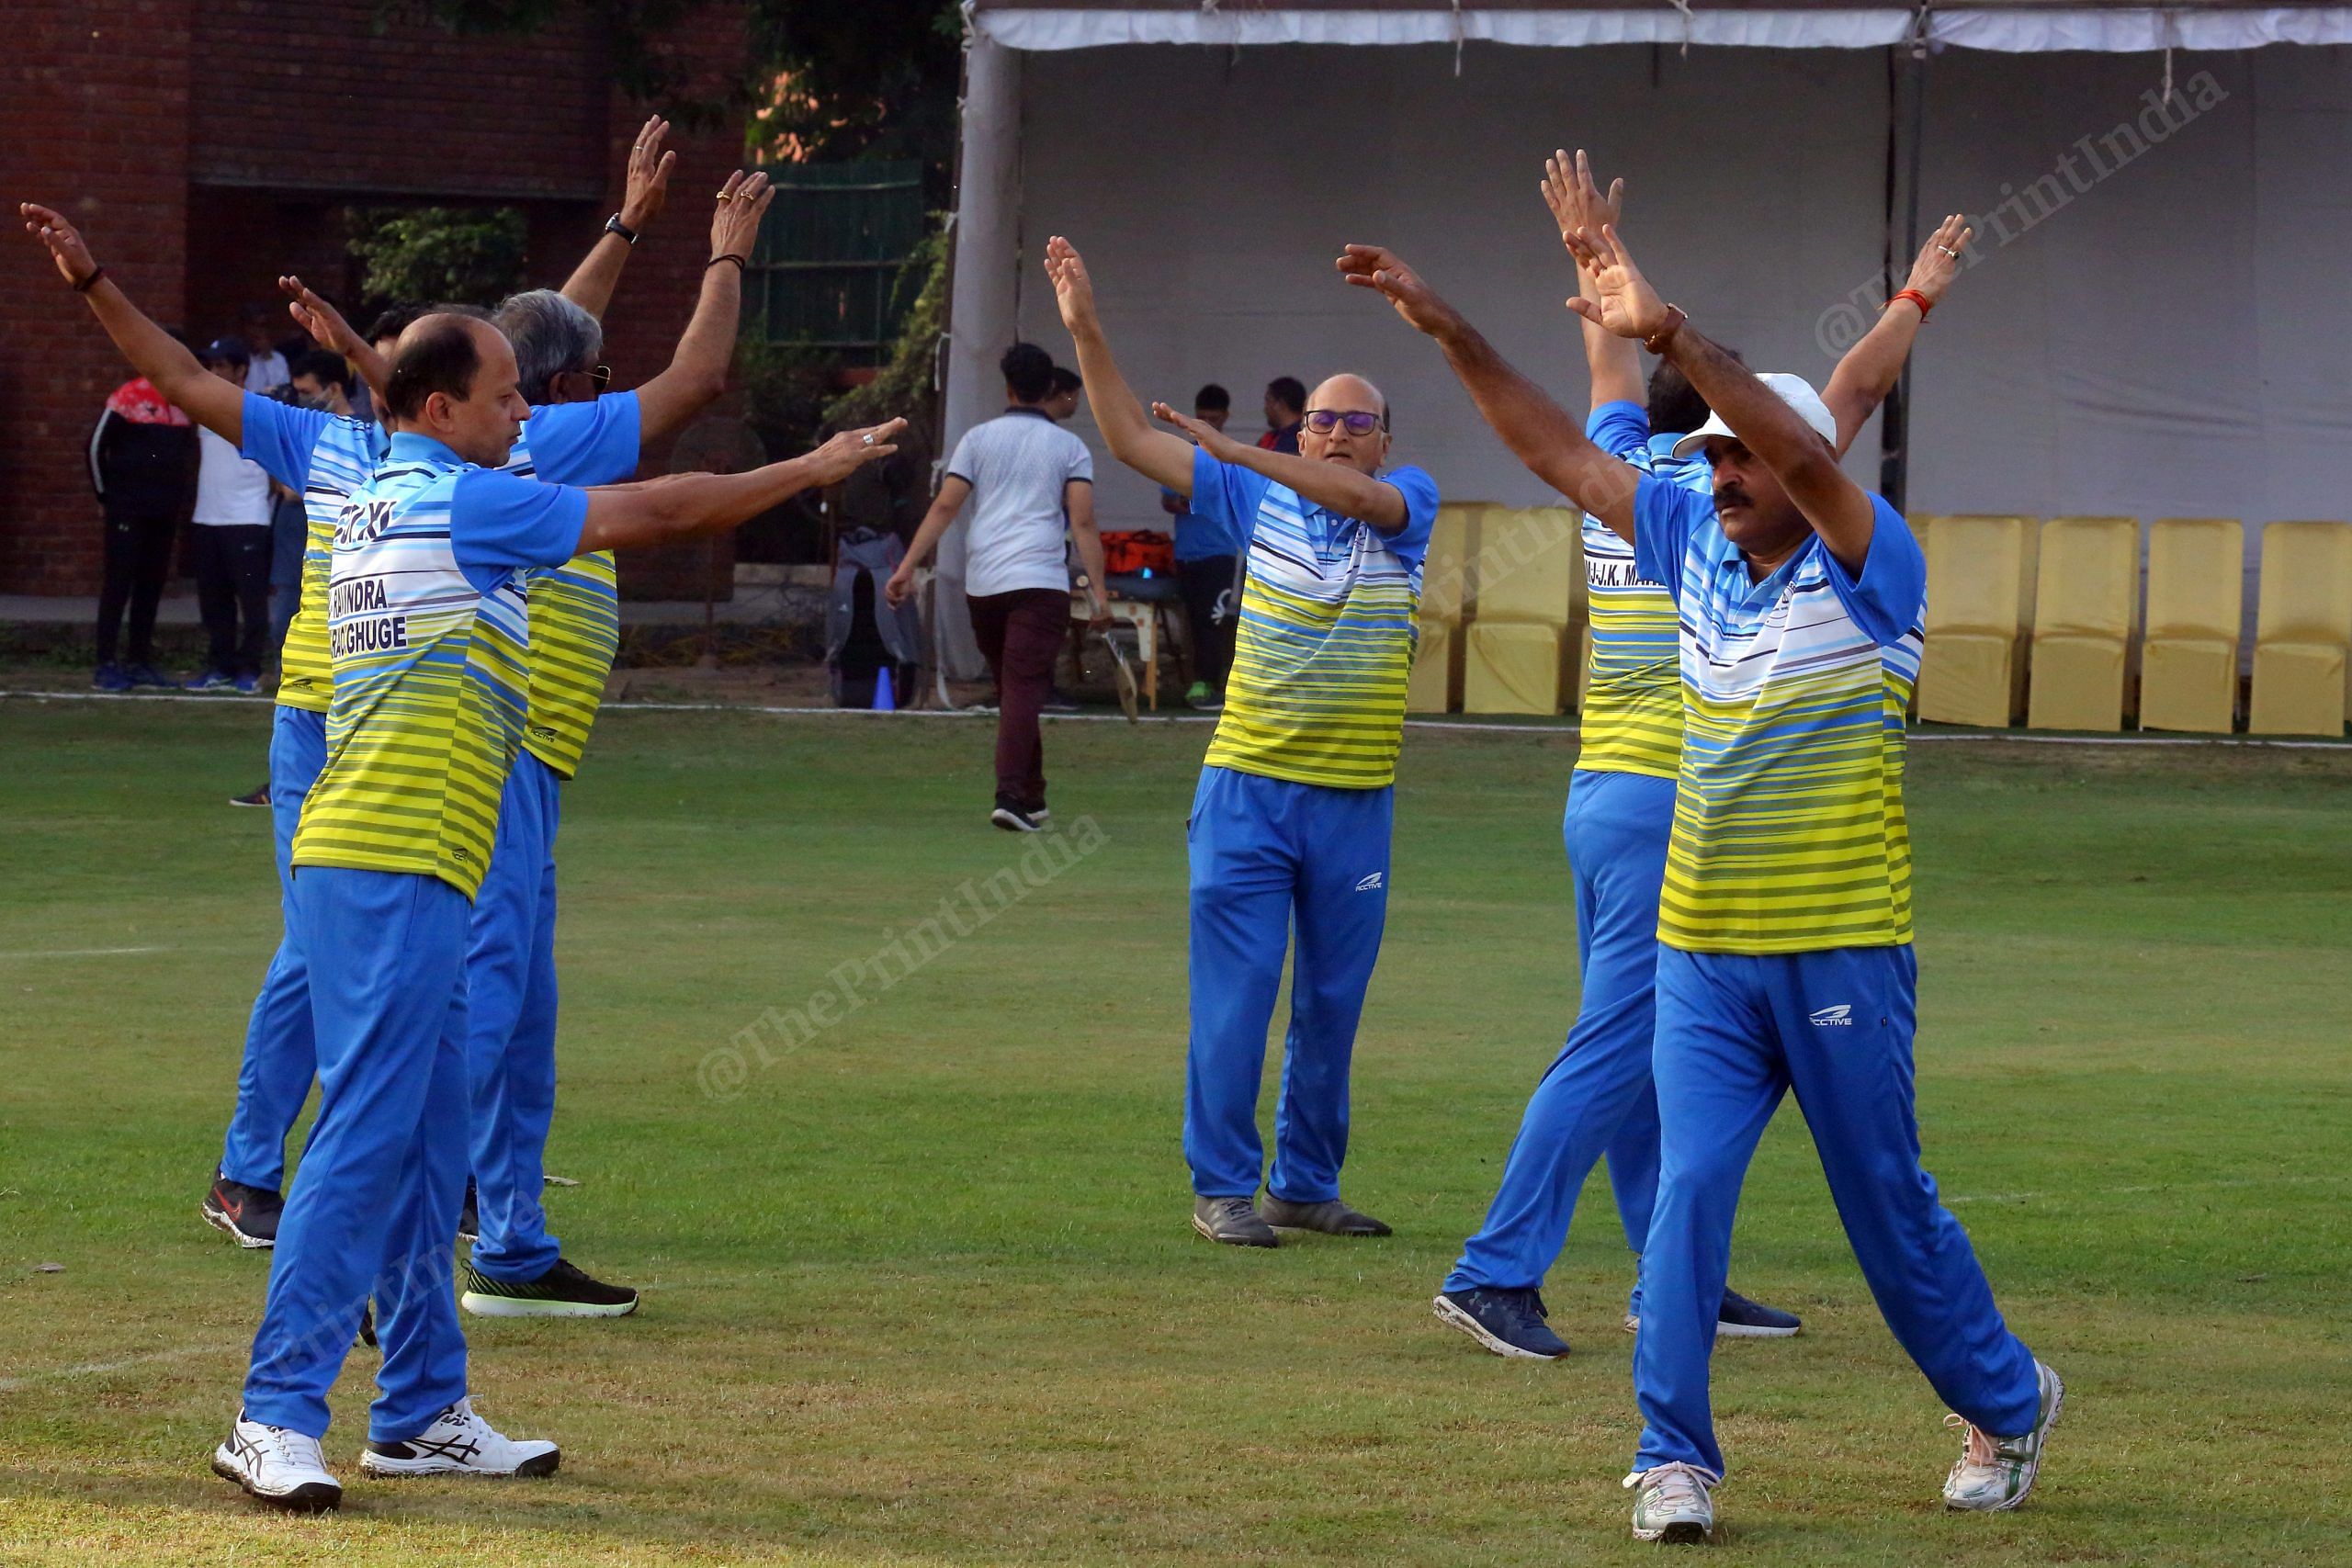 CJI -Xl player Justice Shripathi Ravindra Bhat (centre) warms up before the match, with others of his team | Photo: Praveen Jain | ThePrint